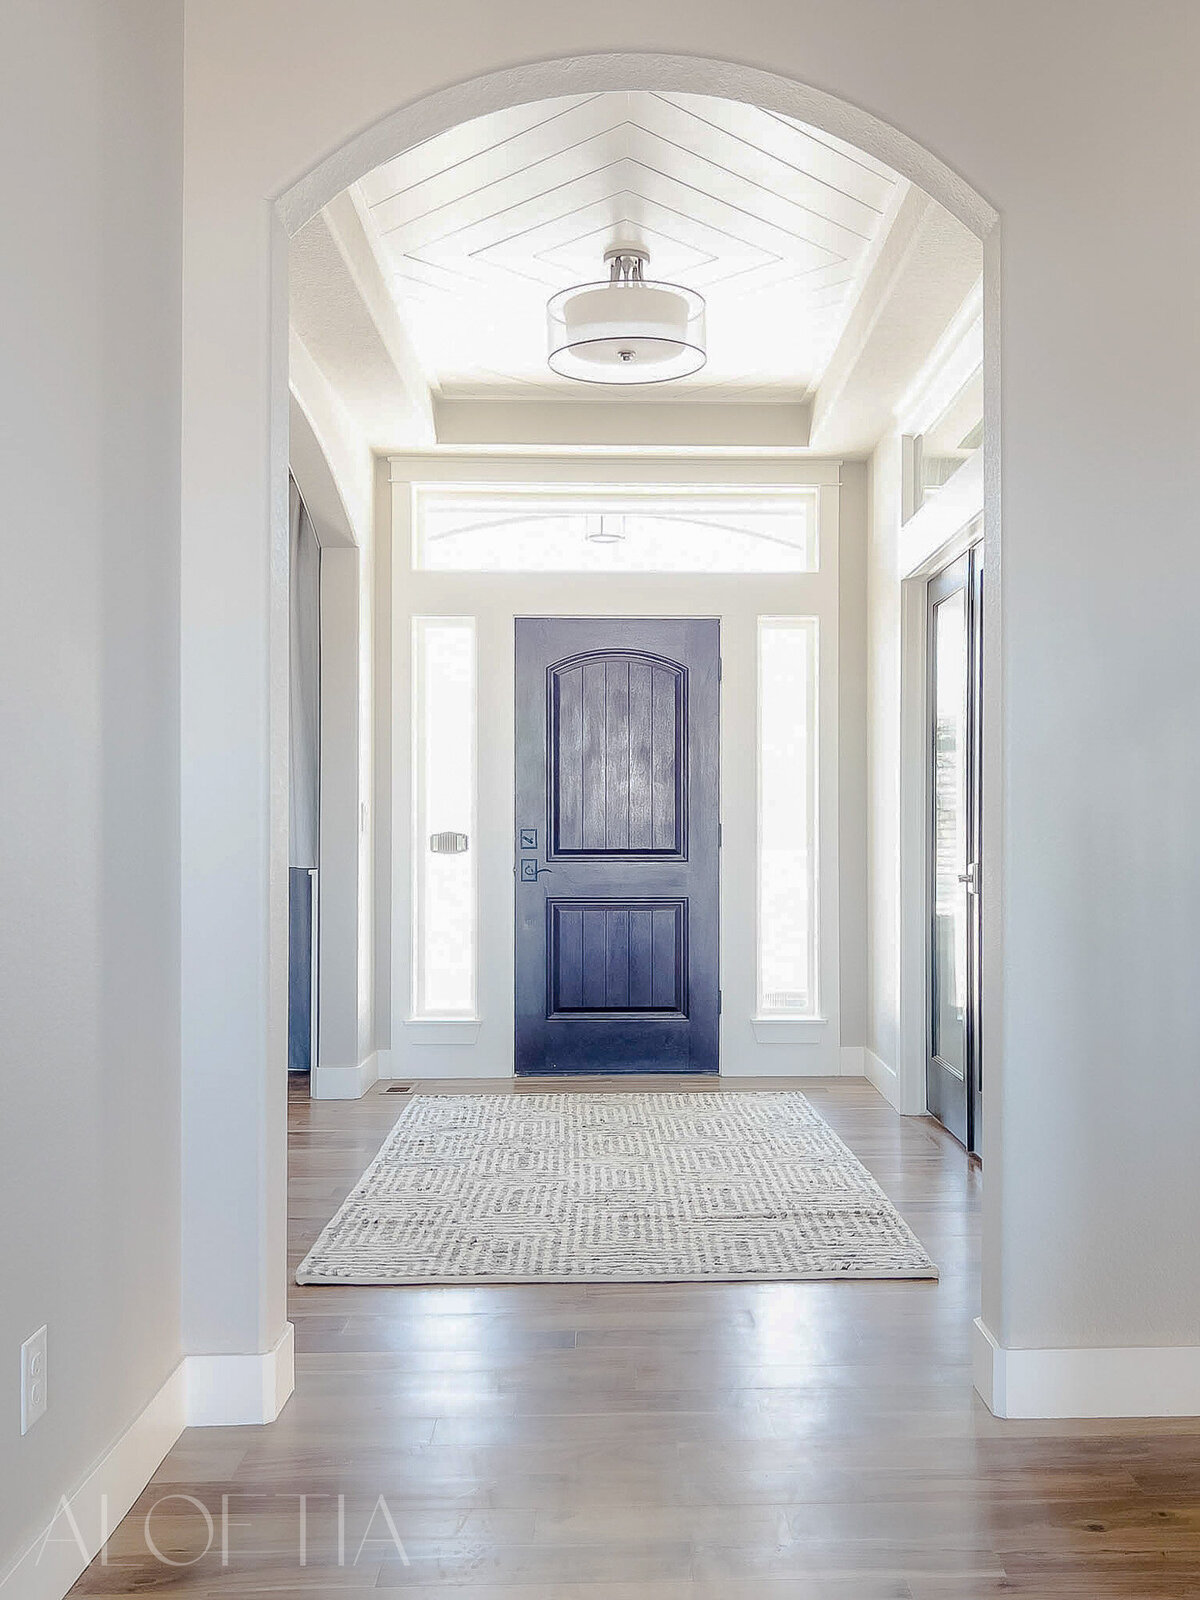 Light-Filled-Entry-Way-Ceiling-Treatment-Colorado-8